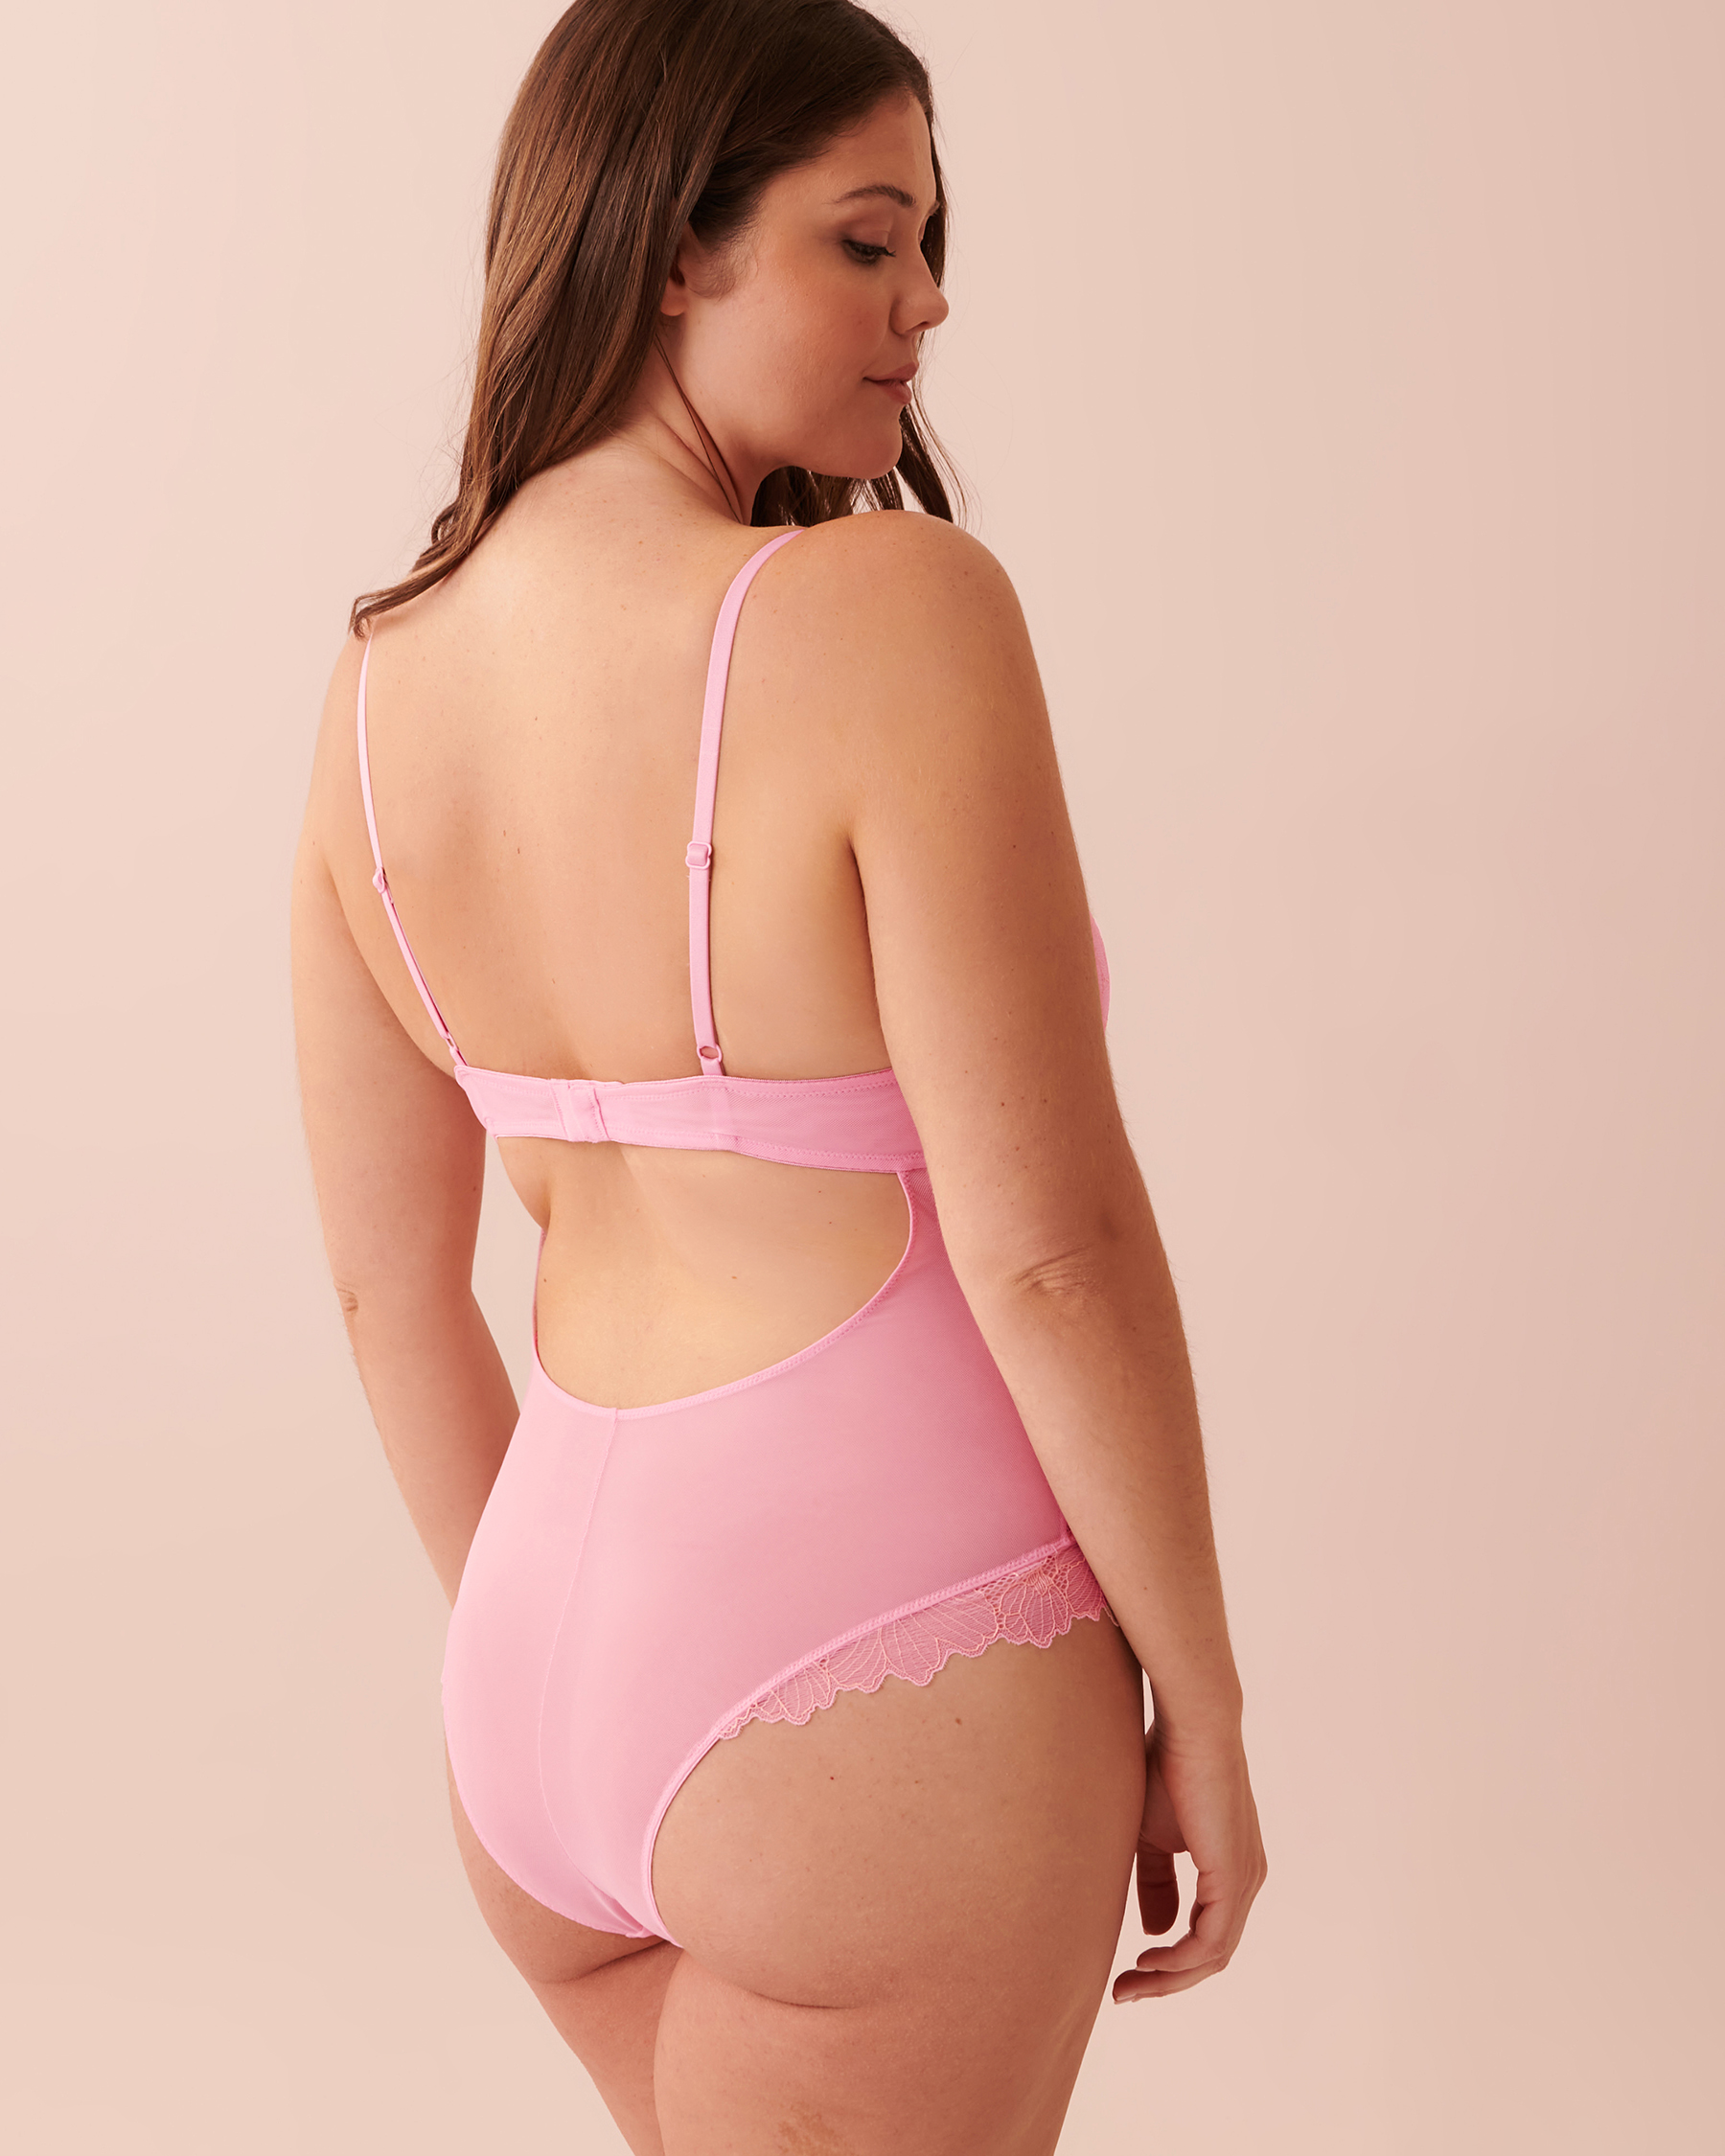 LA VIE EN ROSE Lace and Mesh Open Back Teddy Bright lilac 60300058 - View2